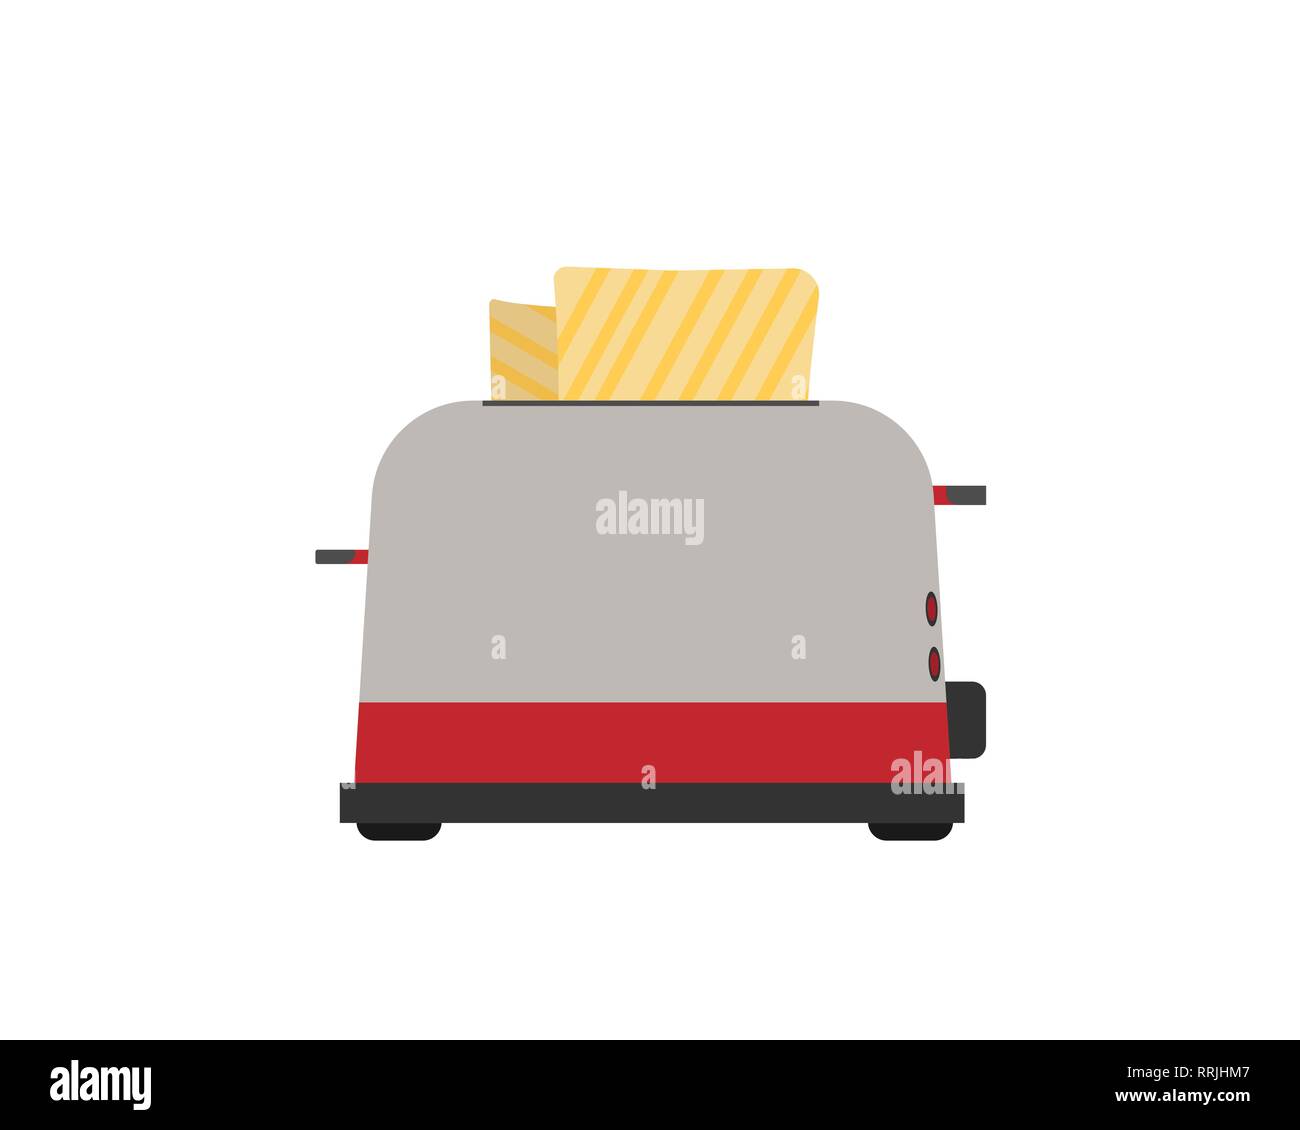 Toaster. Front view. Fry bread. Vector illustration. Stock Vector